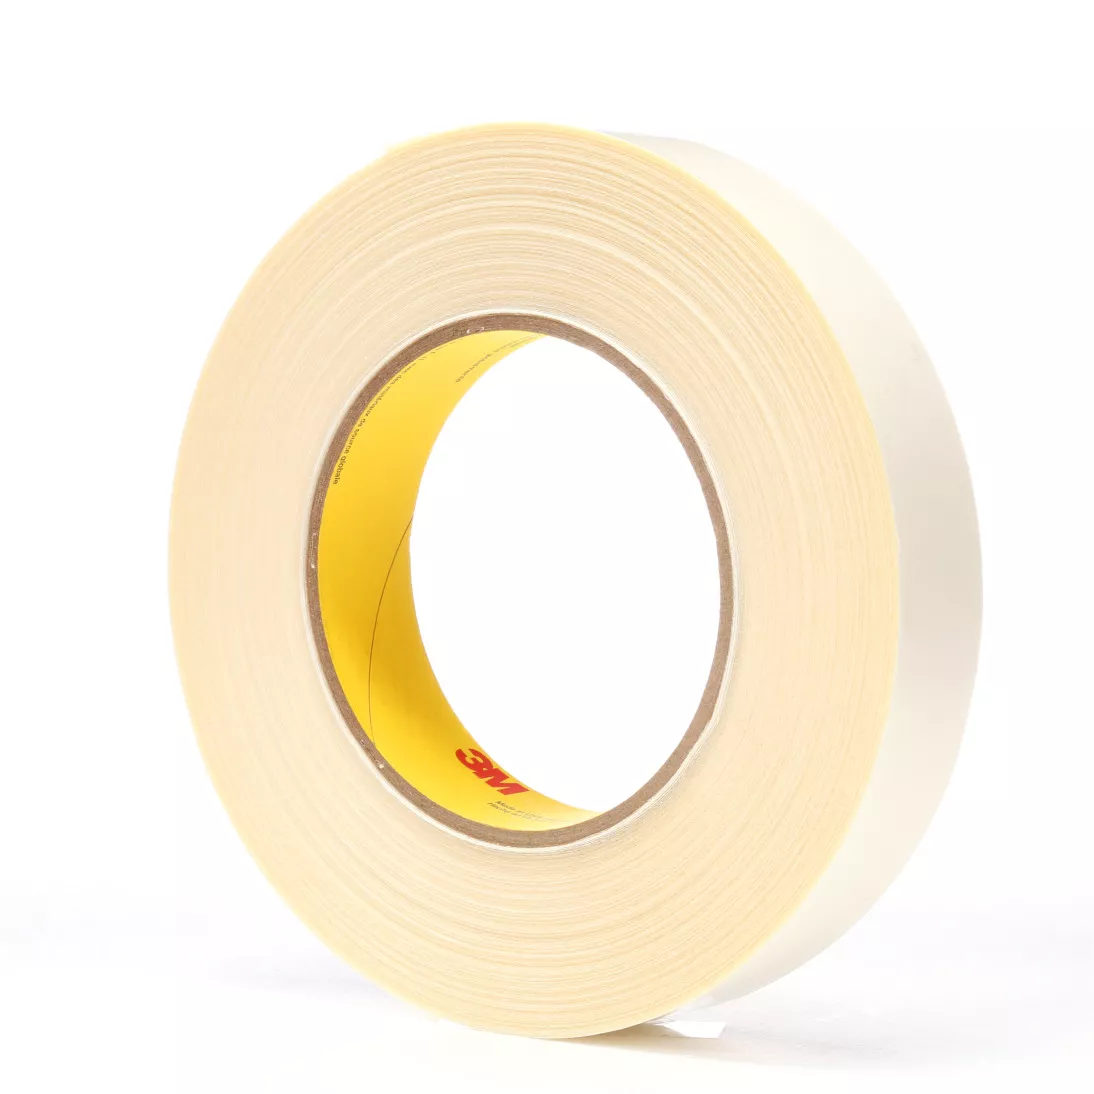 3M™ Double Coated Tape 9740, Clear, 24 mm x 55 m, 3.5 mil, 48 rolls per
case